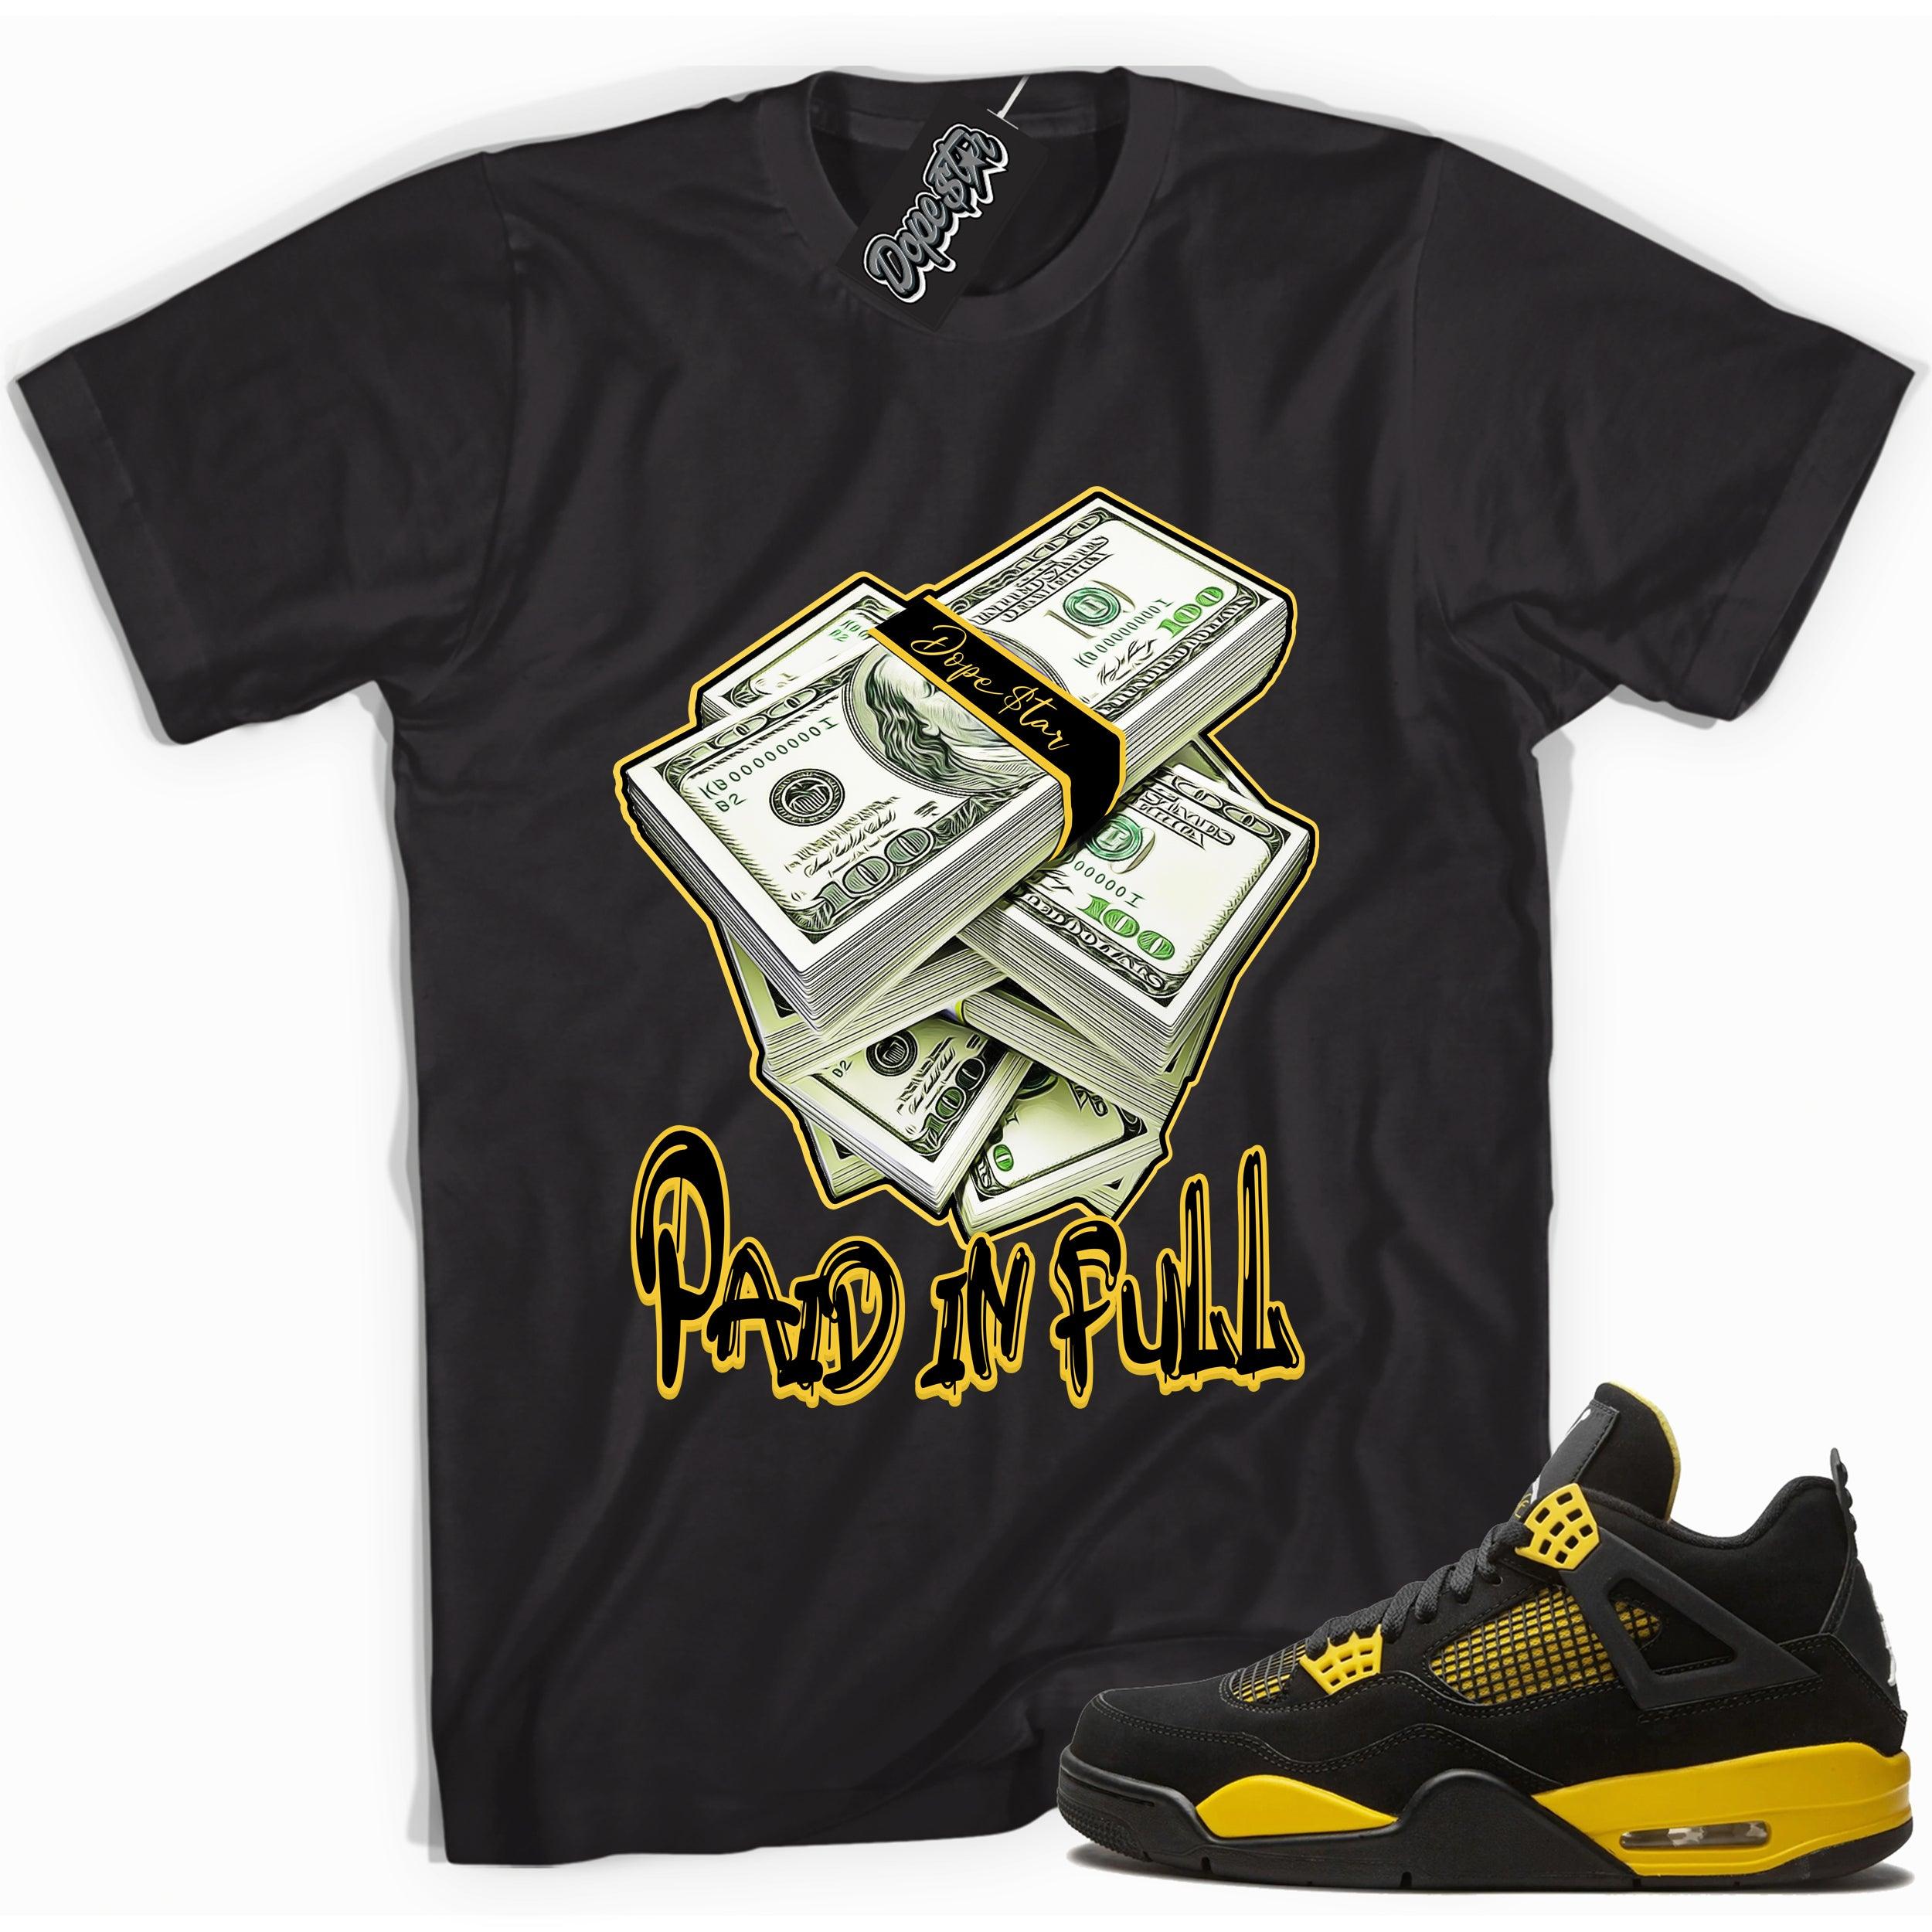 Cool black graphic tee with 'paid in full' print, that perfectly matches  Air Jordan 4 Thunder sneakers